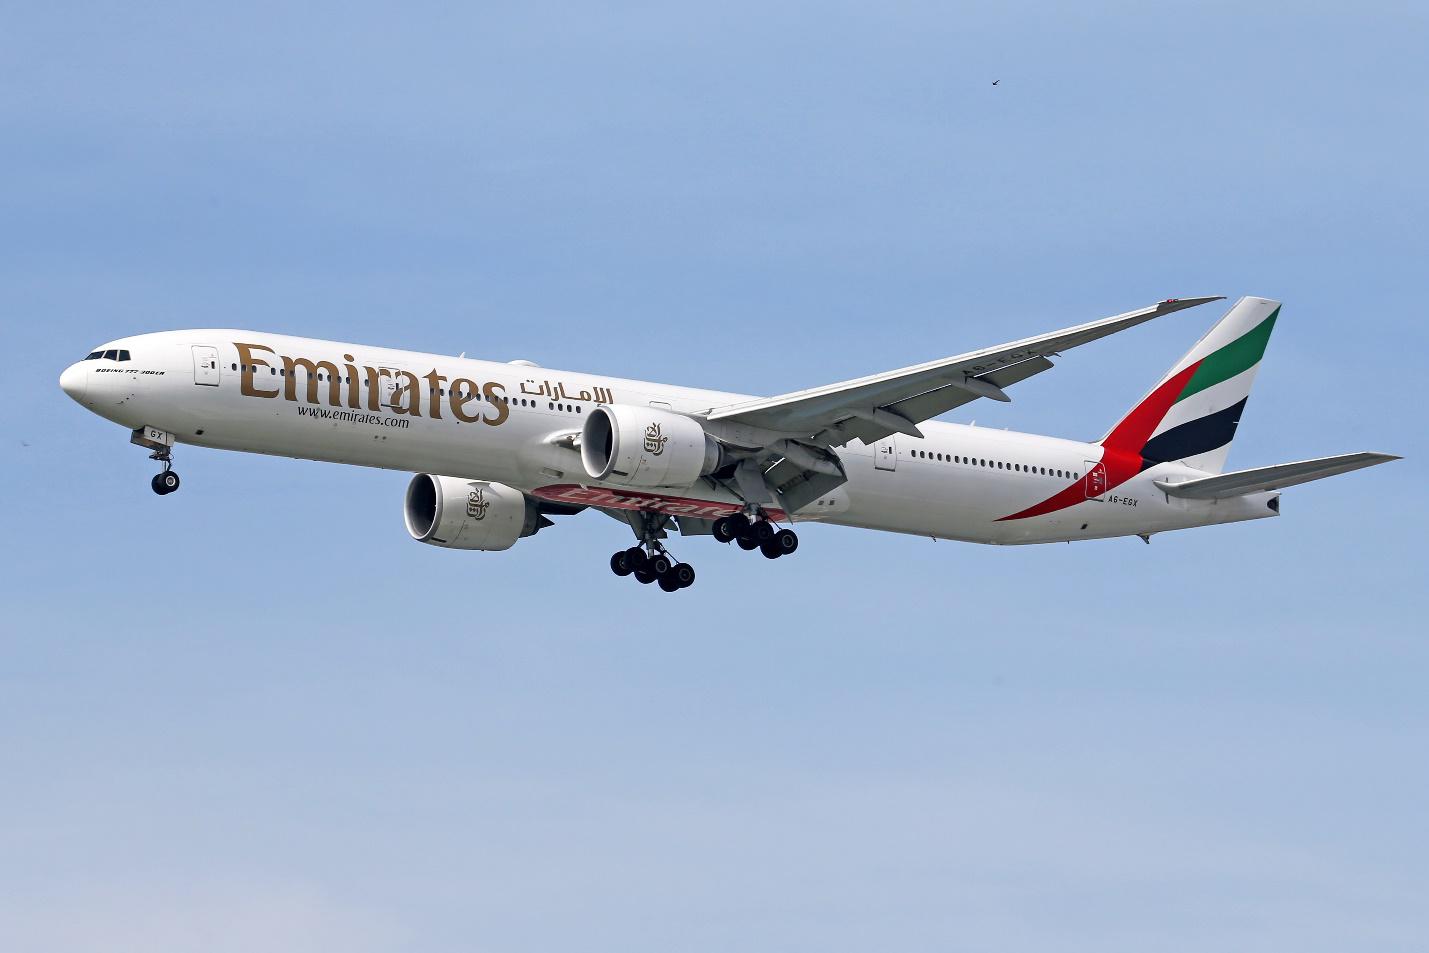 Visit The Most Extraordinary Places By Going With Emirates Flight Booking